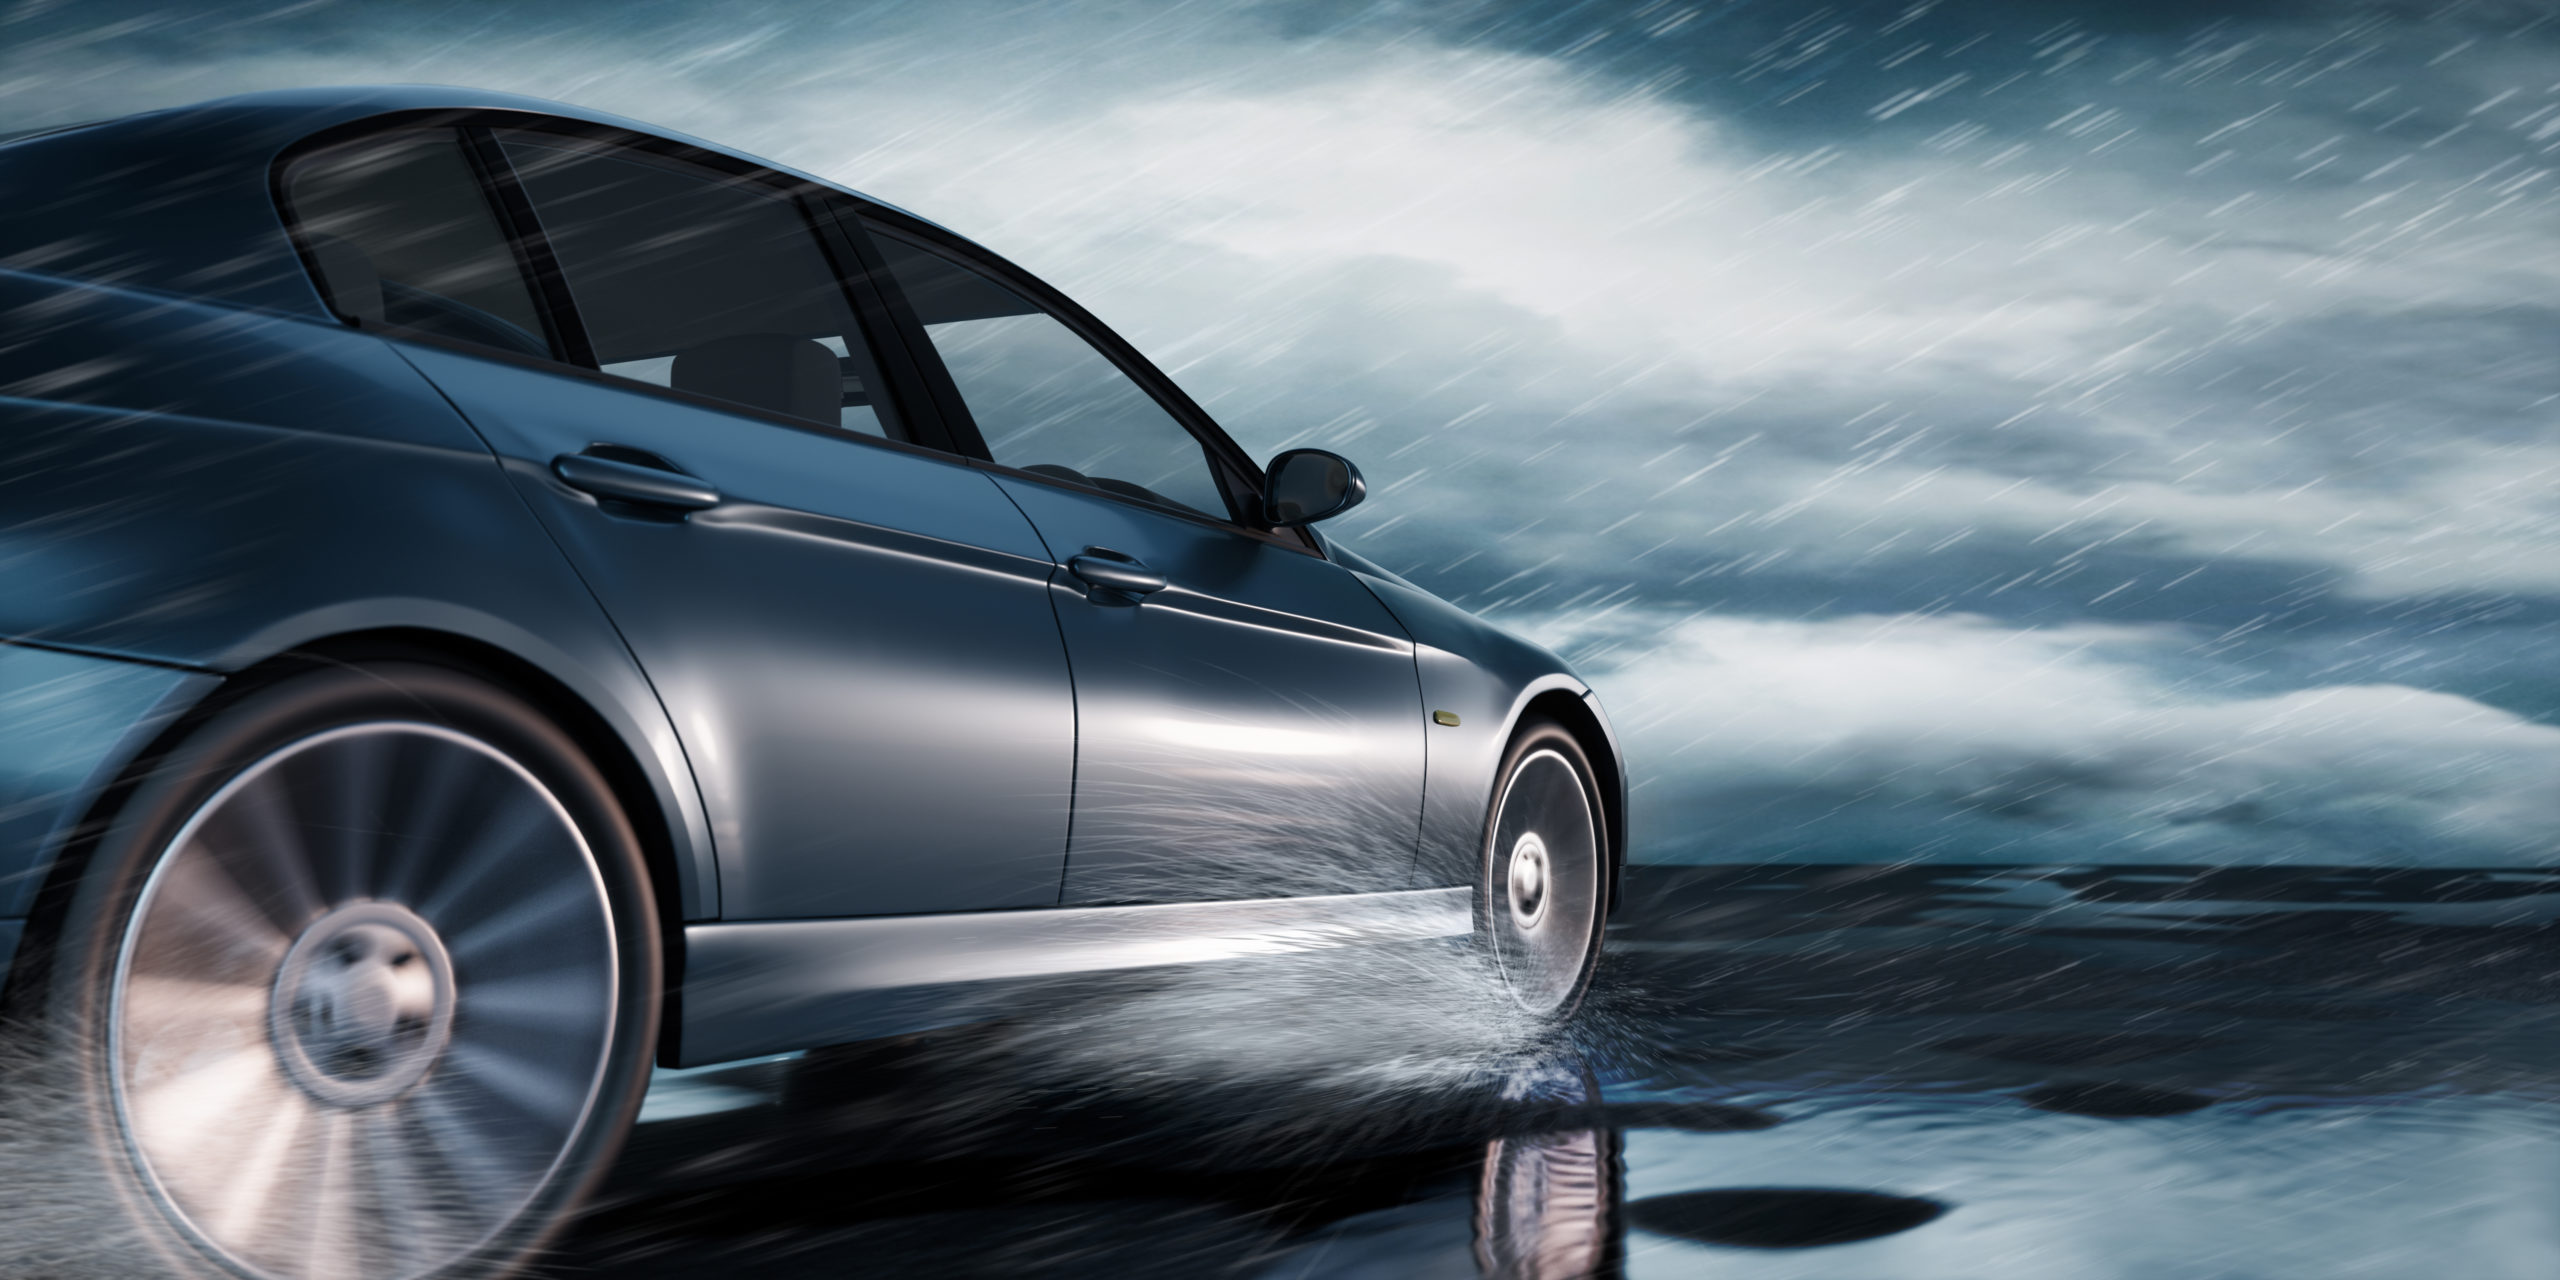 TOP DRIVING SAFETY SUGGESTIONS WHEN IT RAINS